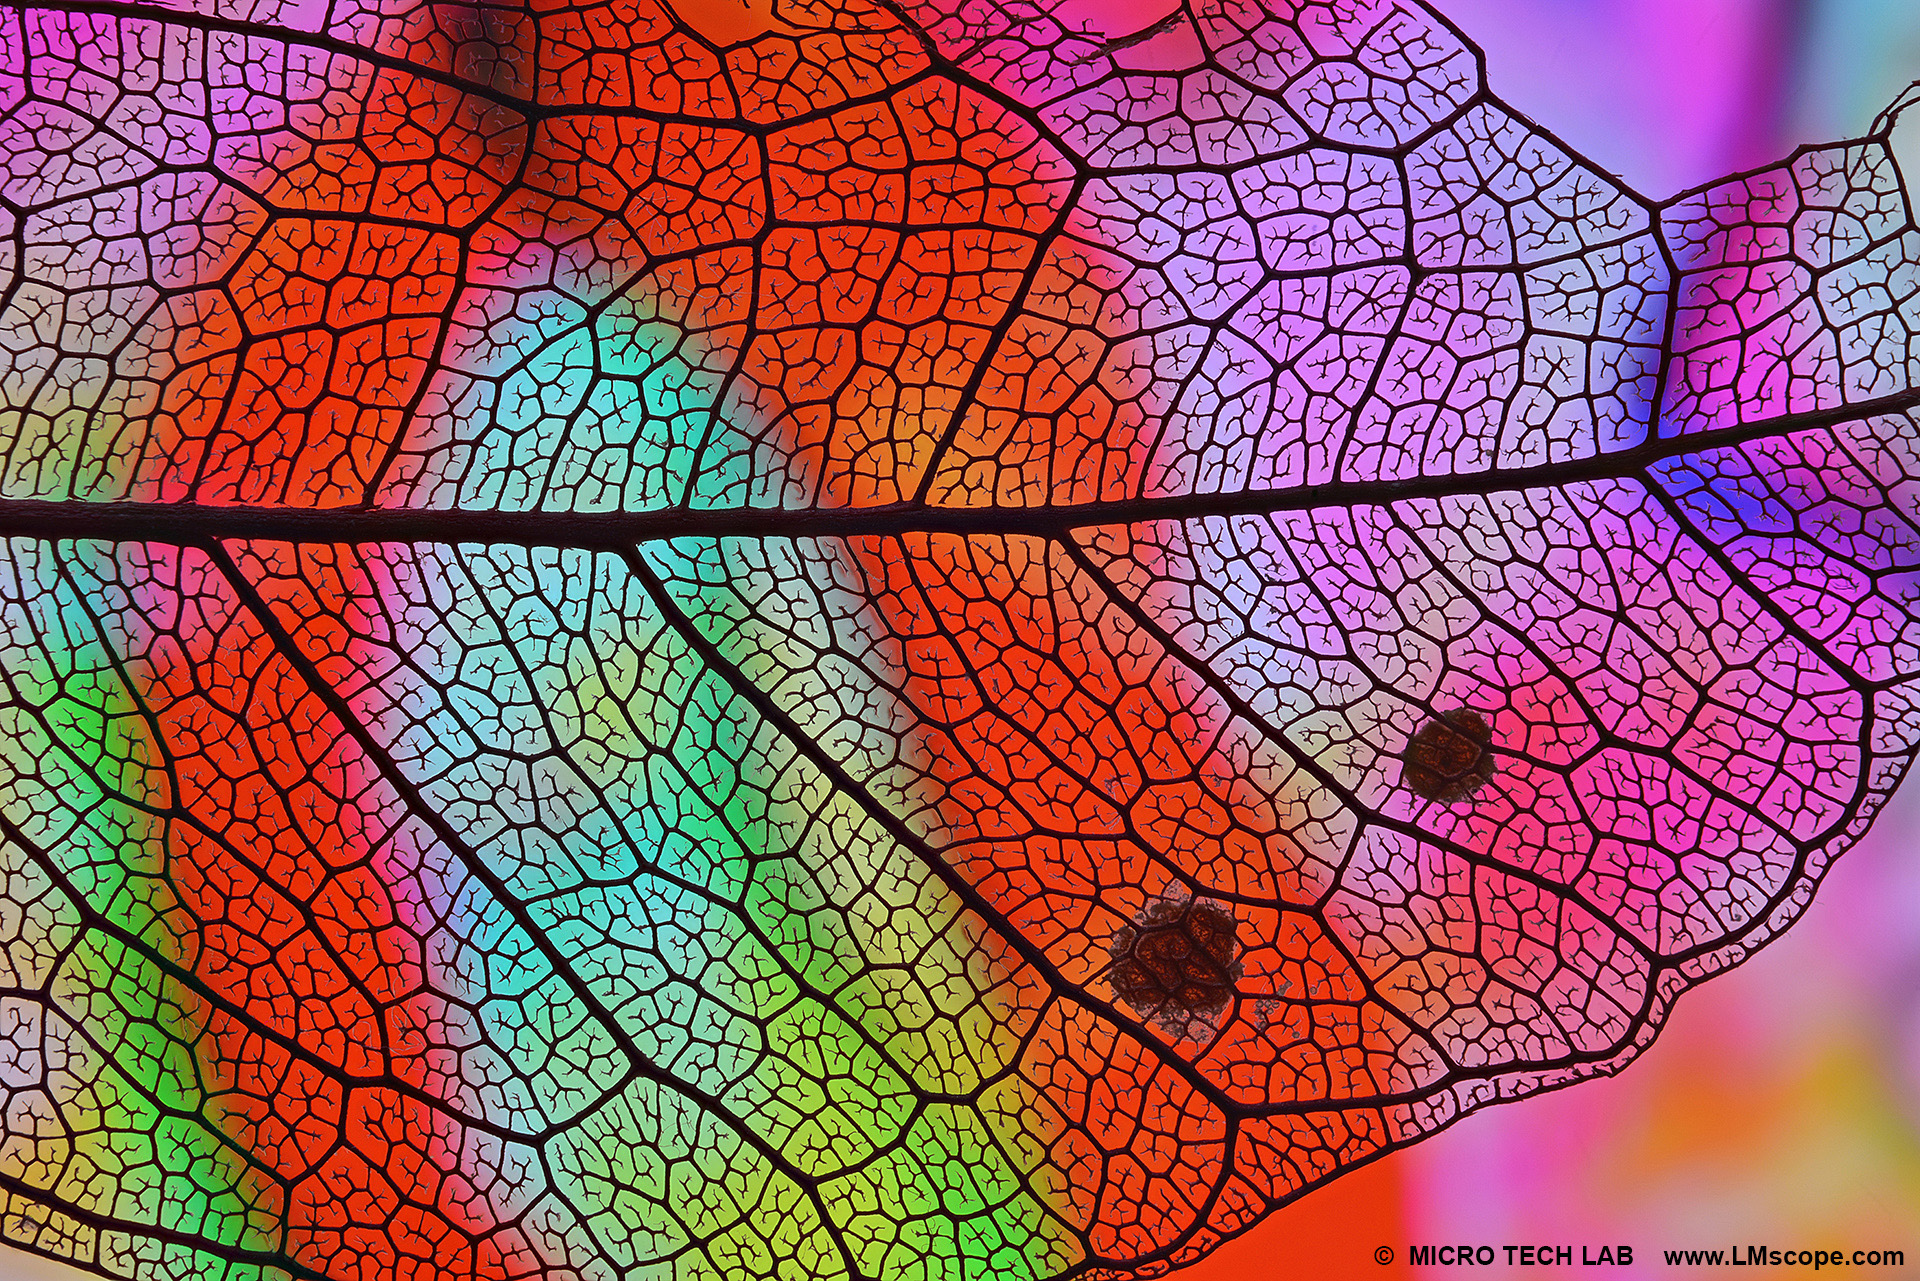 Frame of a leave under the polarisation microscope